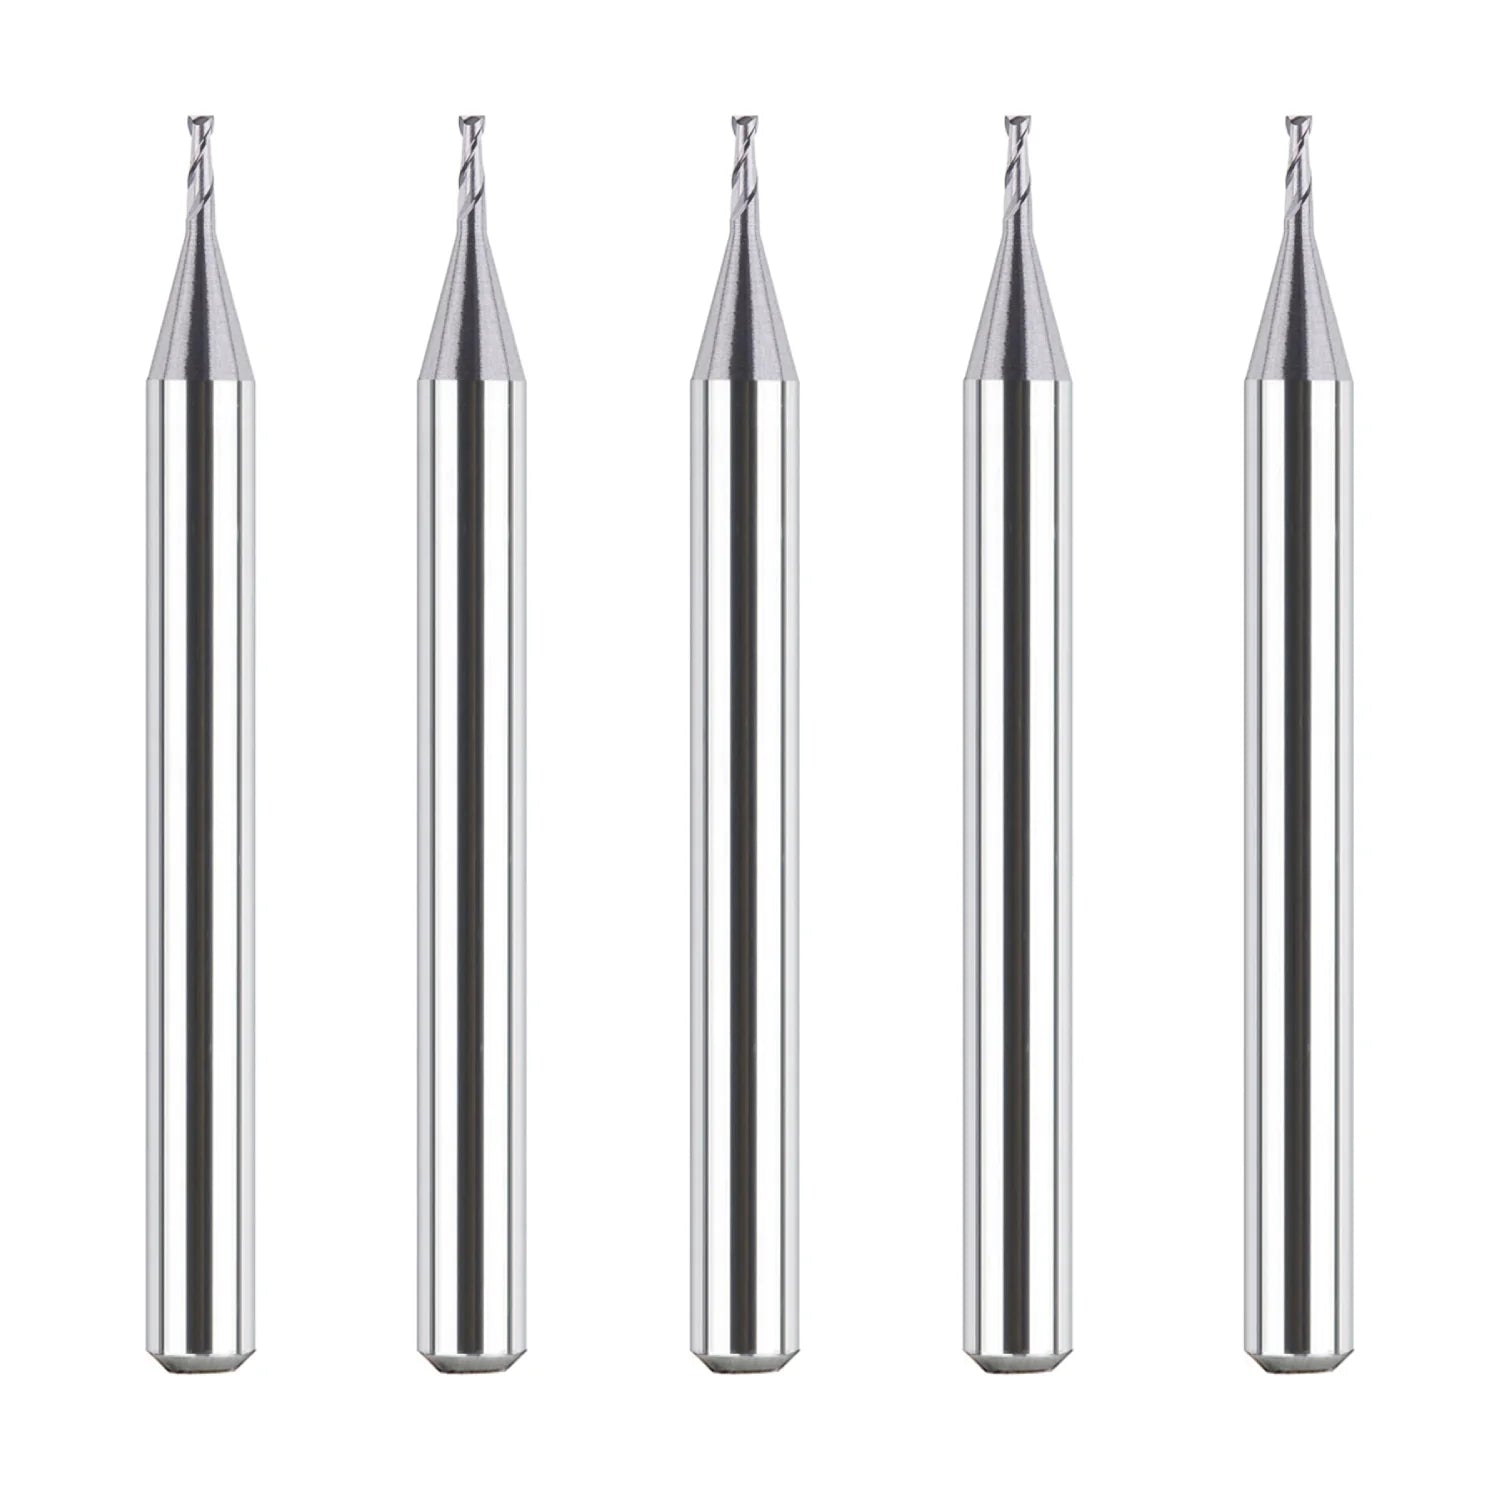 SpeTool 5Pcs/Set Flat Nose 2 Flute 1/32" Dia Carbide End Mill For Steel Maching